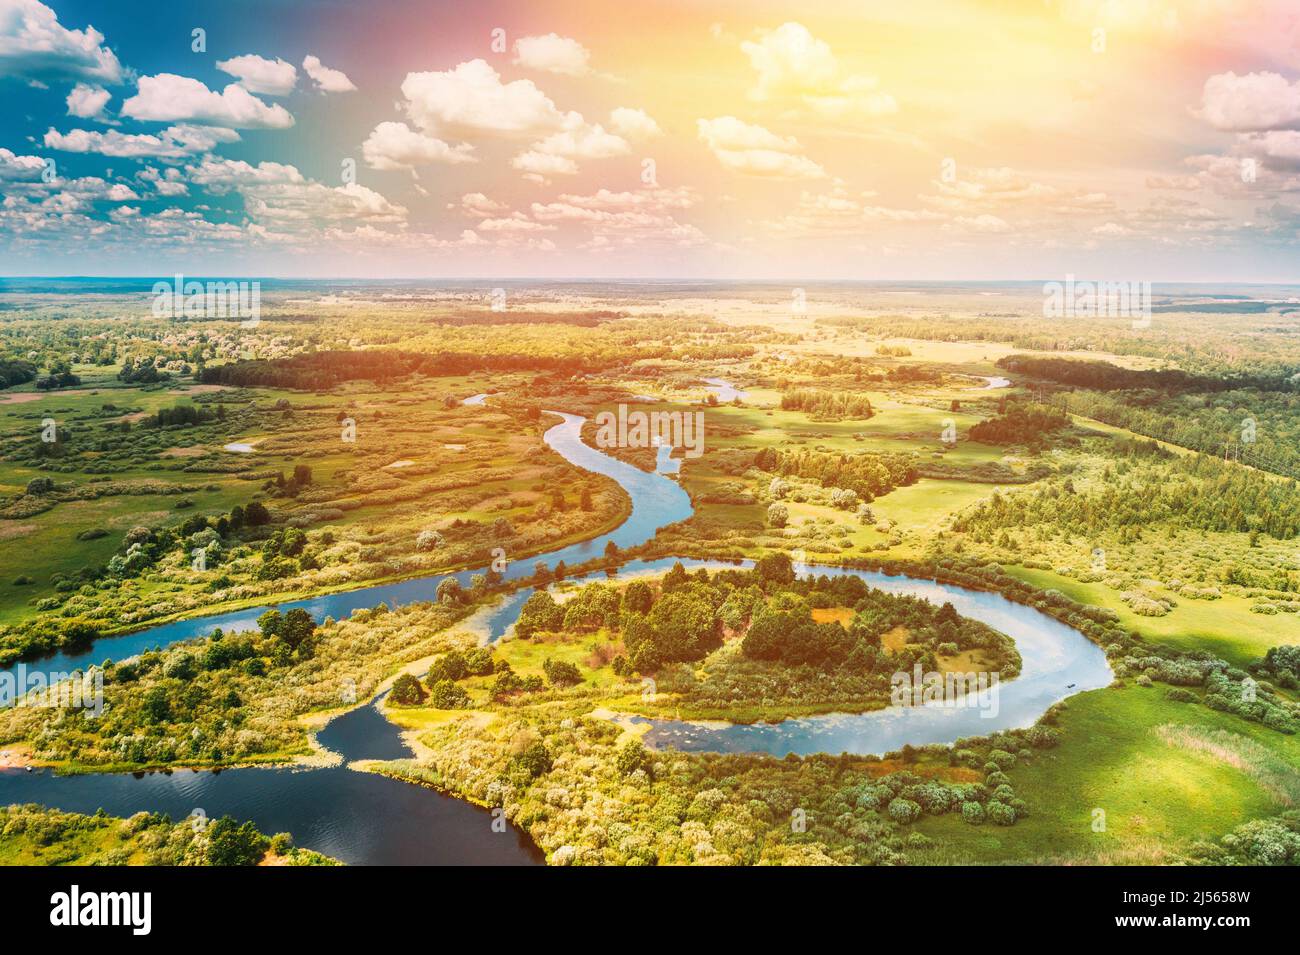 Aerial View Of Summer Curved River Landscape In Sunny Summer Day. Top View From High Attitude In Summer Season. Stock Photo